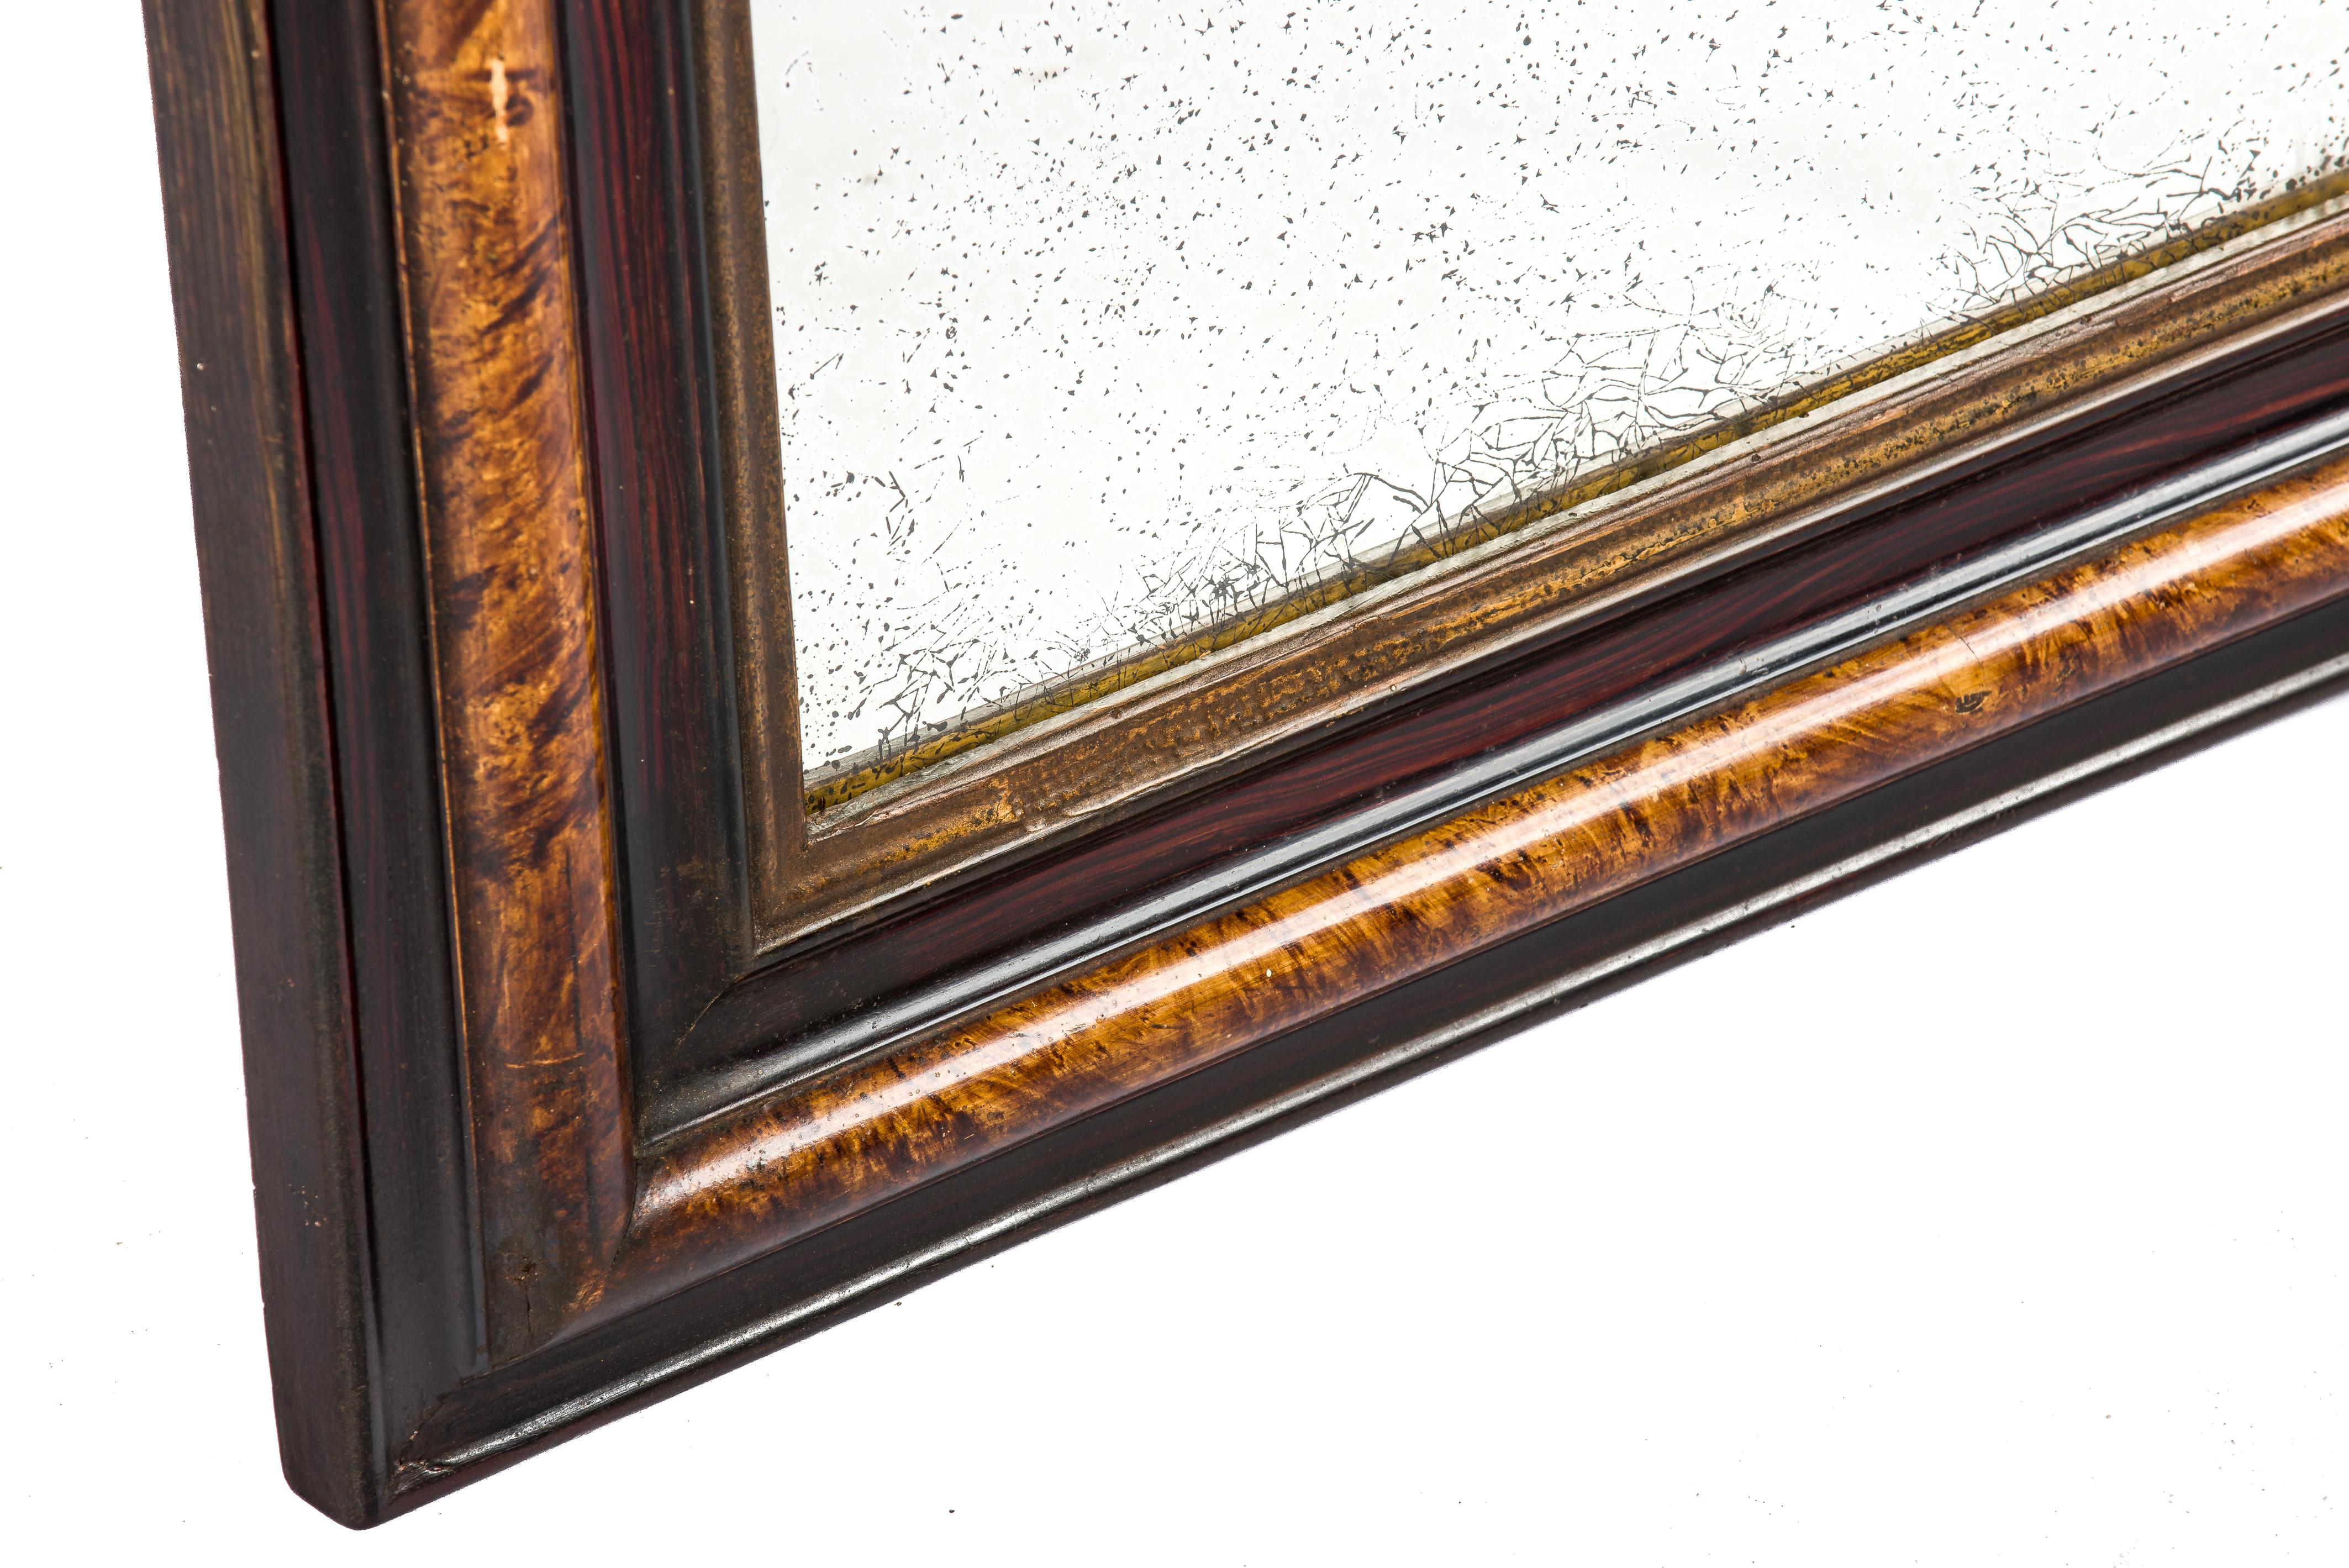 This Louis Philippe mirror was made in Northern France in the late 19th century, circa 1890. The mirror has a solid pine frame that was smoothened with gesso. The mirror frame is painted to resemble rosewood with a beautiful grain pattern. The most